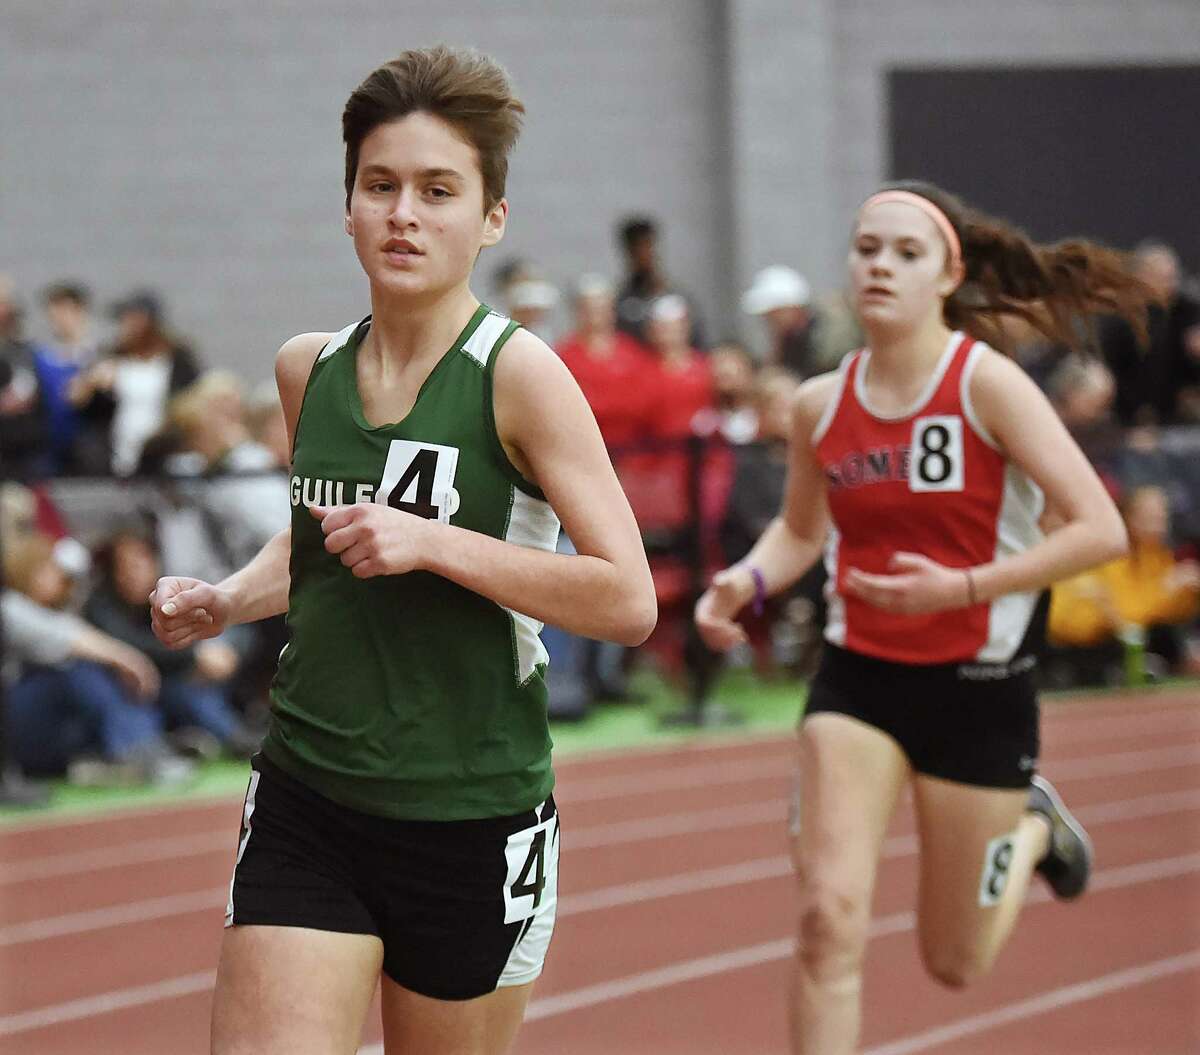 Guilford junior Meredith Bloss placed second in the 3200 meter run in 11:08.05 at the CIAC Indoor Track & Field State Open, Saturday, Feb. 17, 2018, at Floyd Little Athletic Center at Hillhouse High School in New Haven.